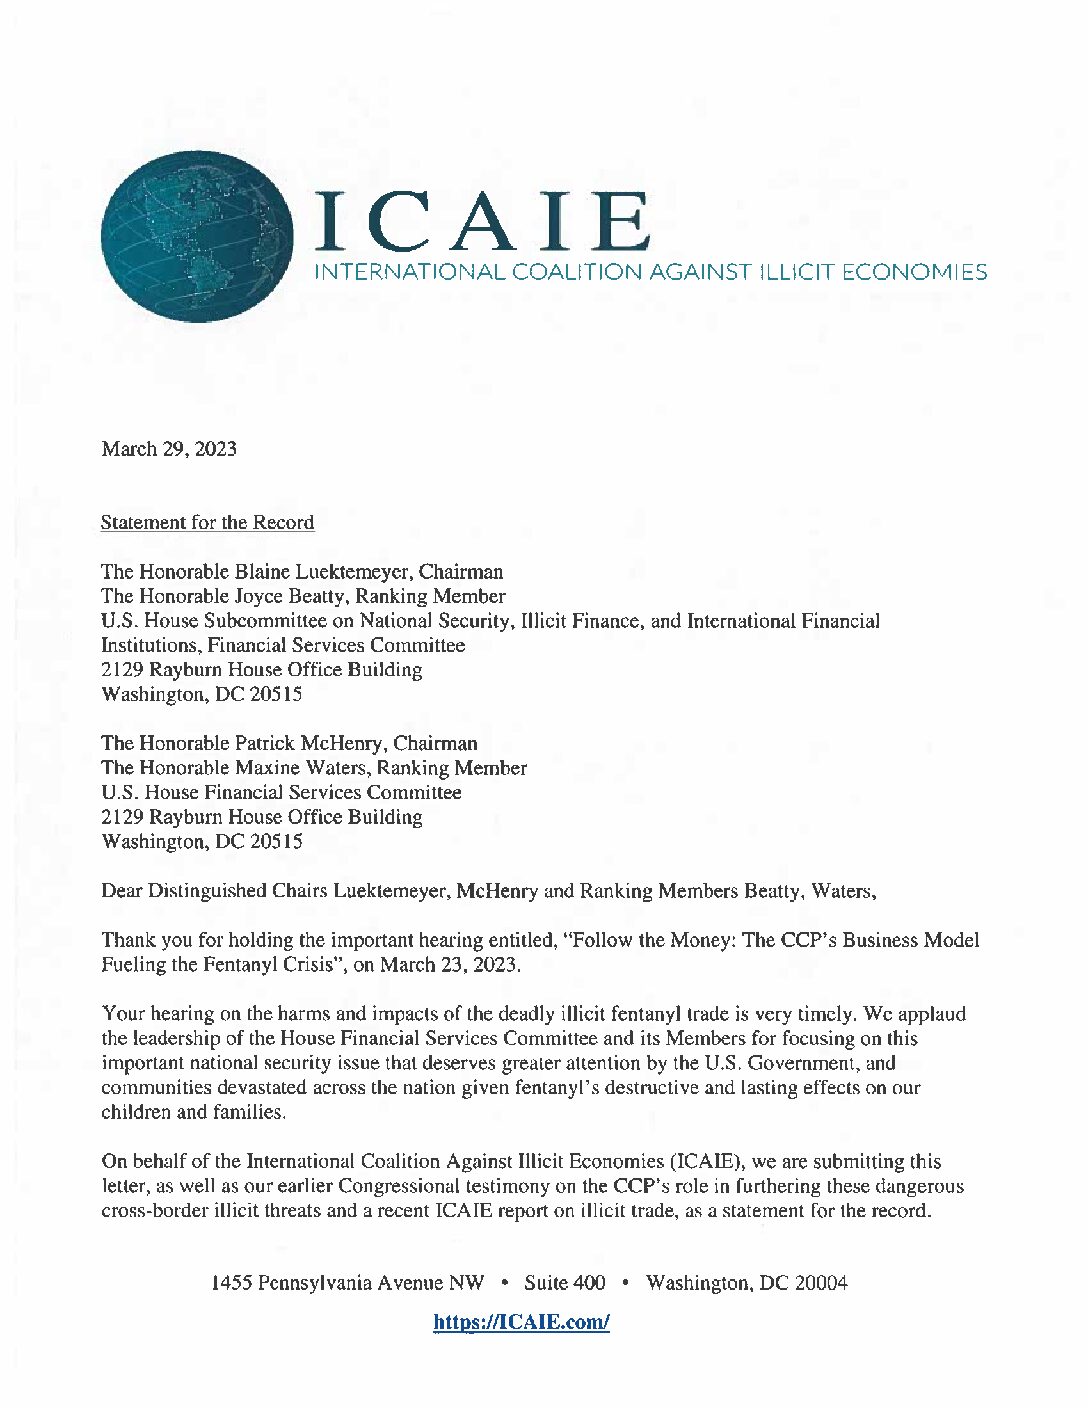 ICAIE Statement for the Record for Congressional hearing on “Follow the Money: The CCP’s Business Model Fueling the Fentanyl Crisis”, March 23, 2023, U.S. House Subcommittee on National Security, Illicit Finance, and International Financial Institutions, Financial Services Committee.